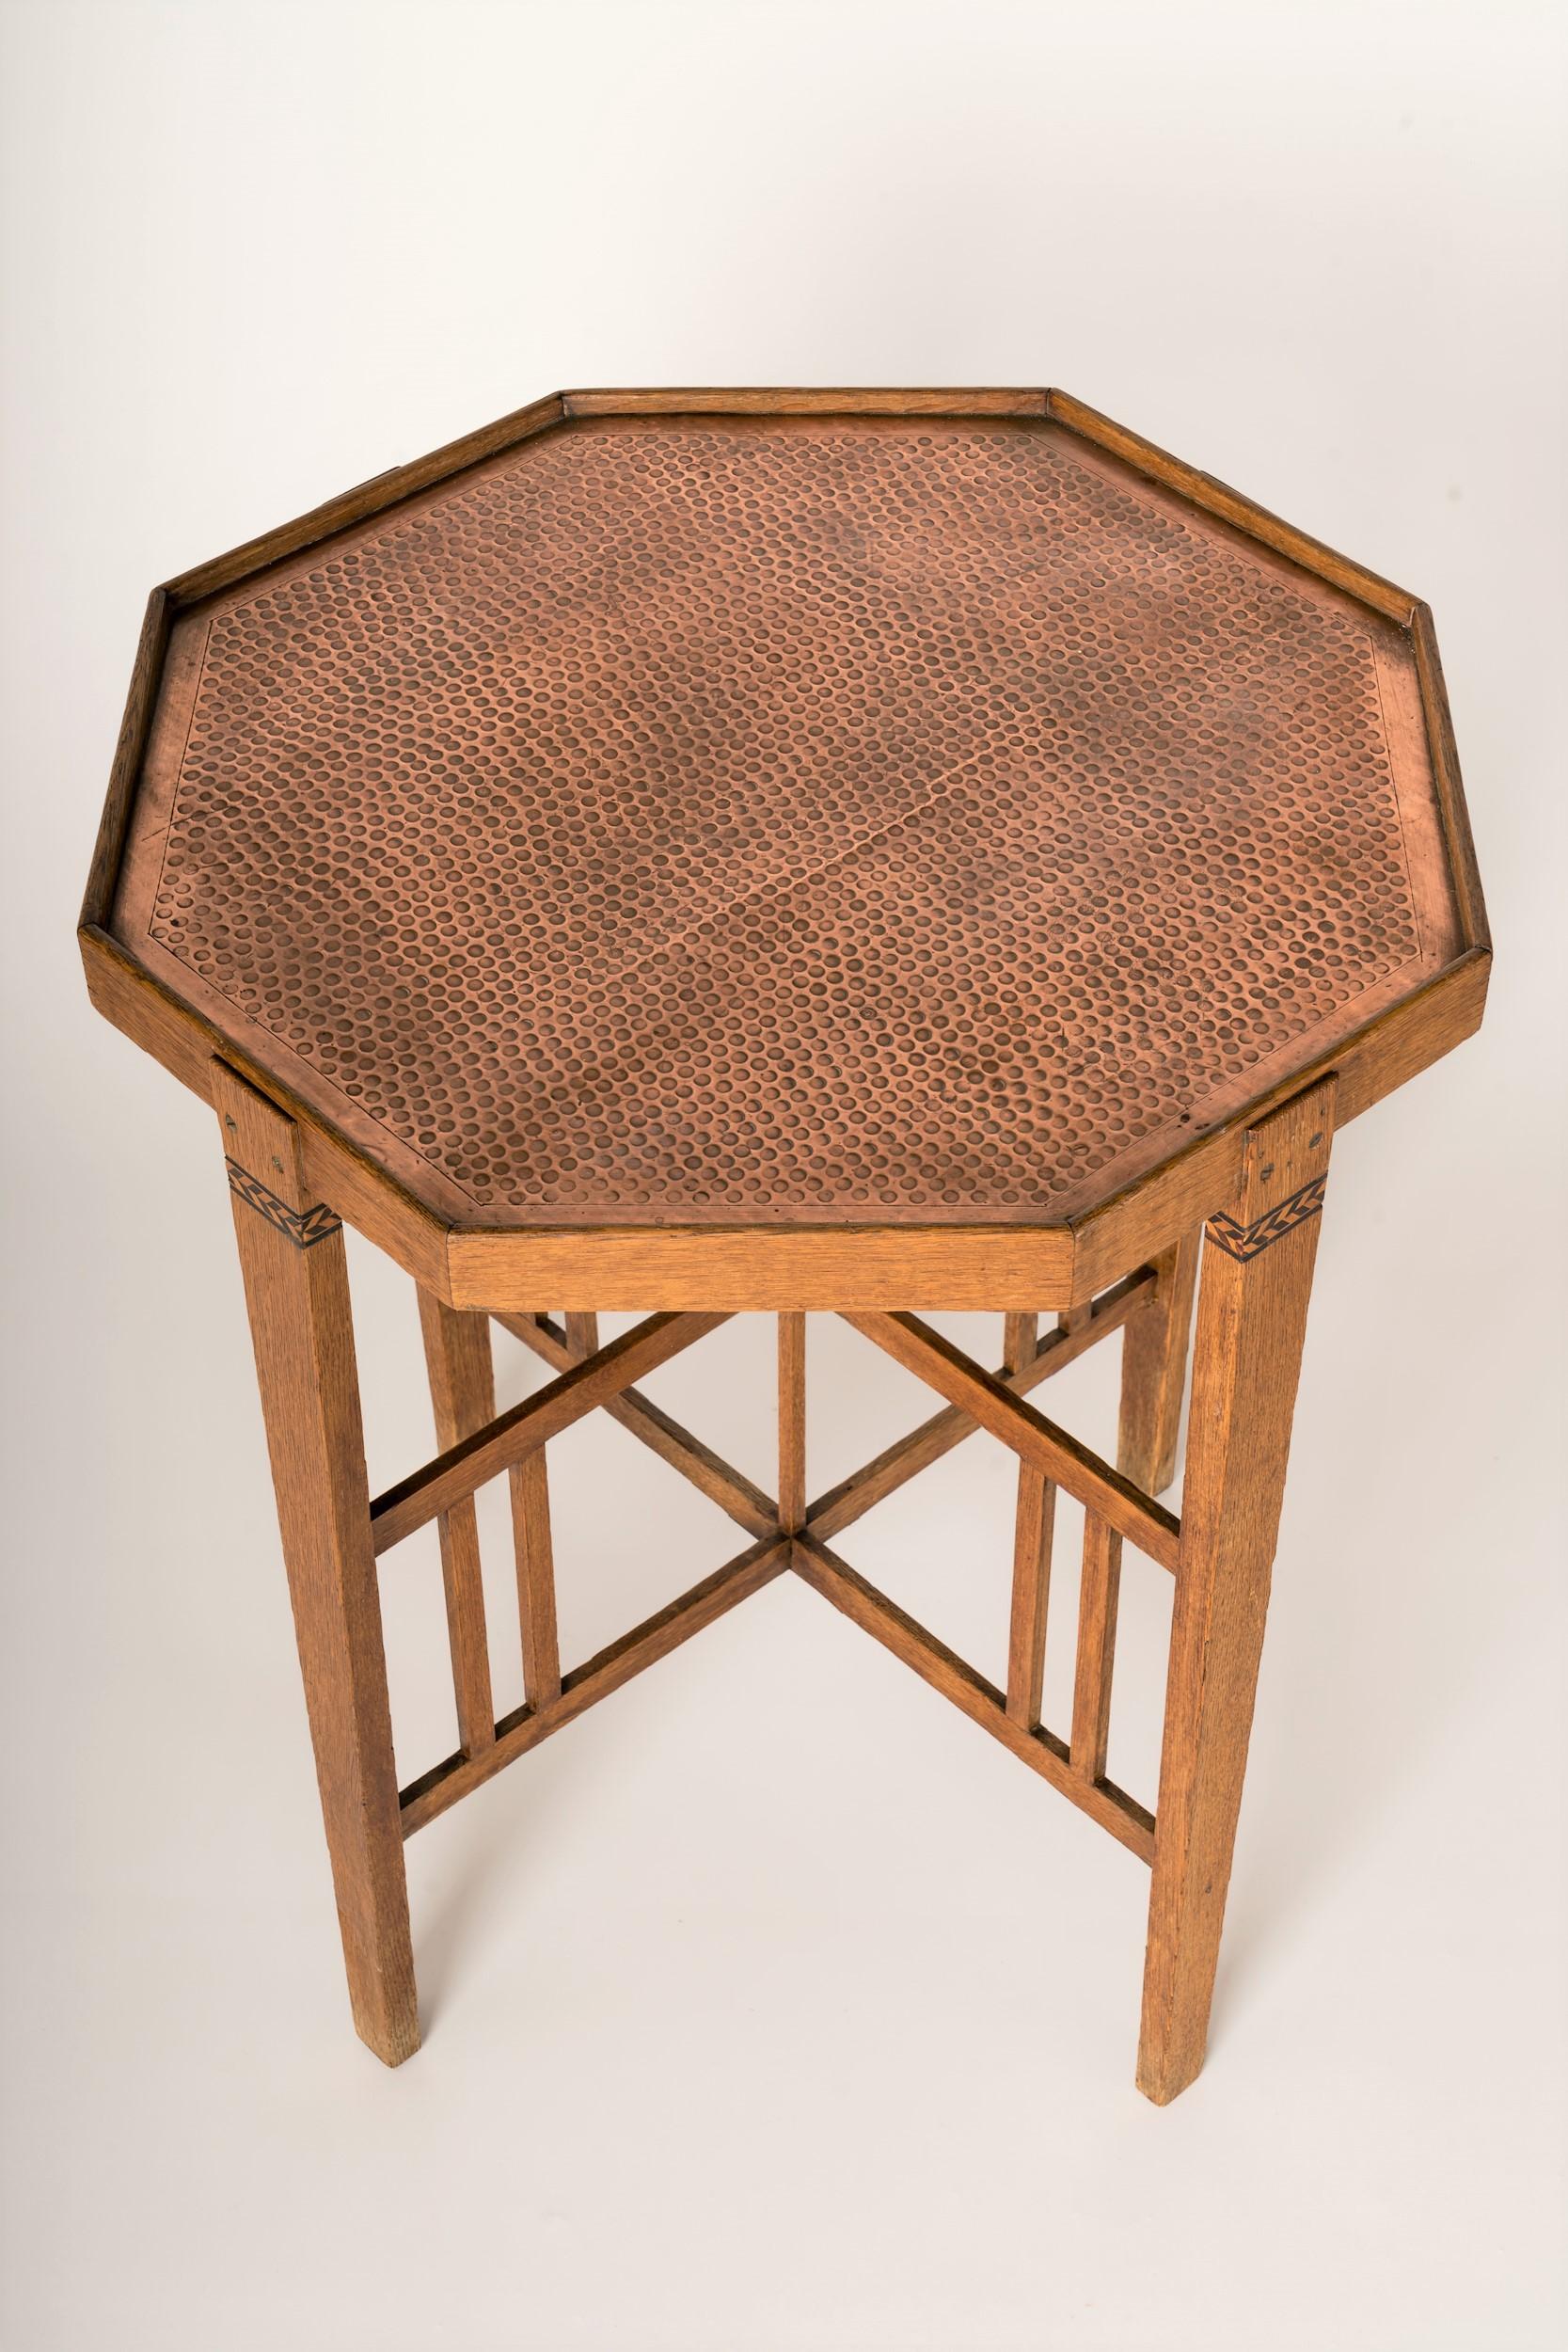 Oak and Copper Viennese Secession Oak Side Table, Austria 1910's In Fair Condition For Sale In New York, NY